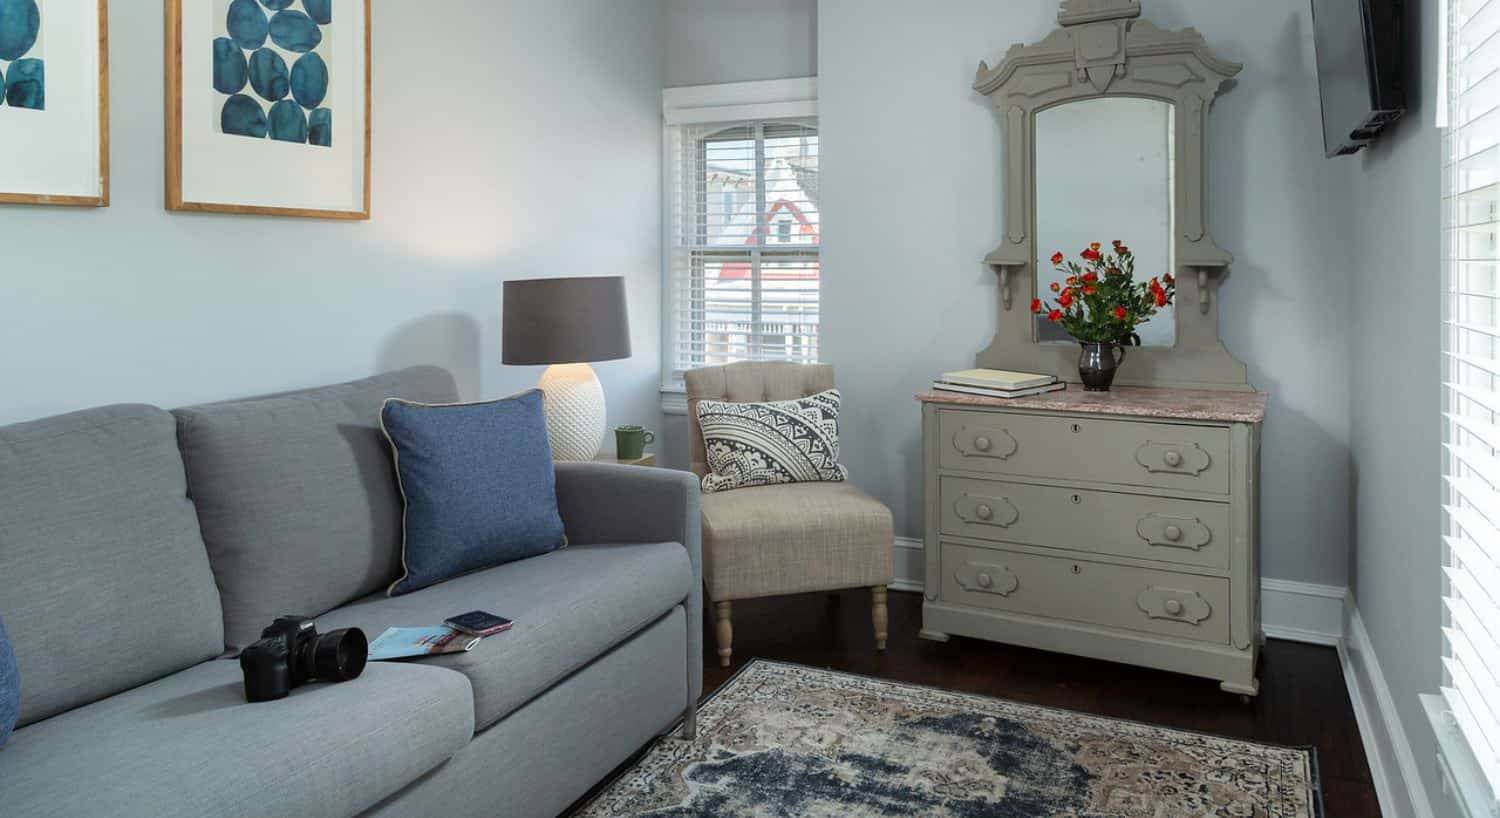 Sitting area with gray upholstered couch, digital SLR camera, denim pillow, hardwood flooring, light gray walls, and gray-painted dresser with mirror on top